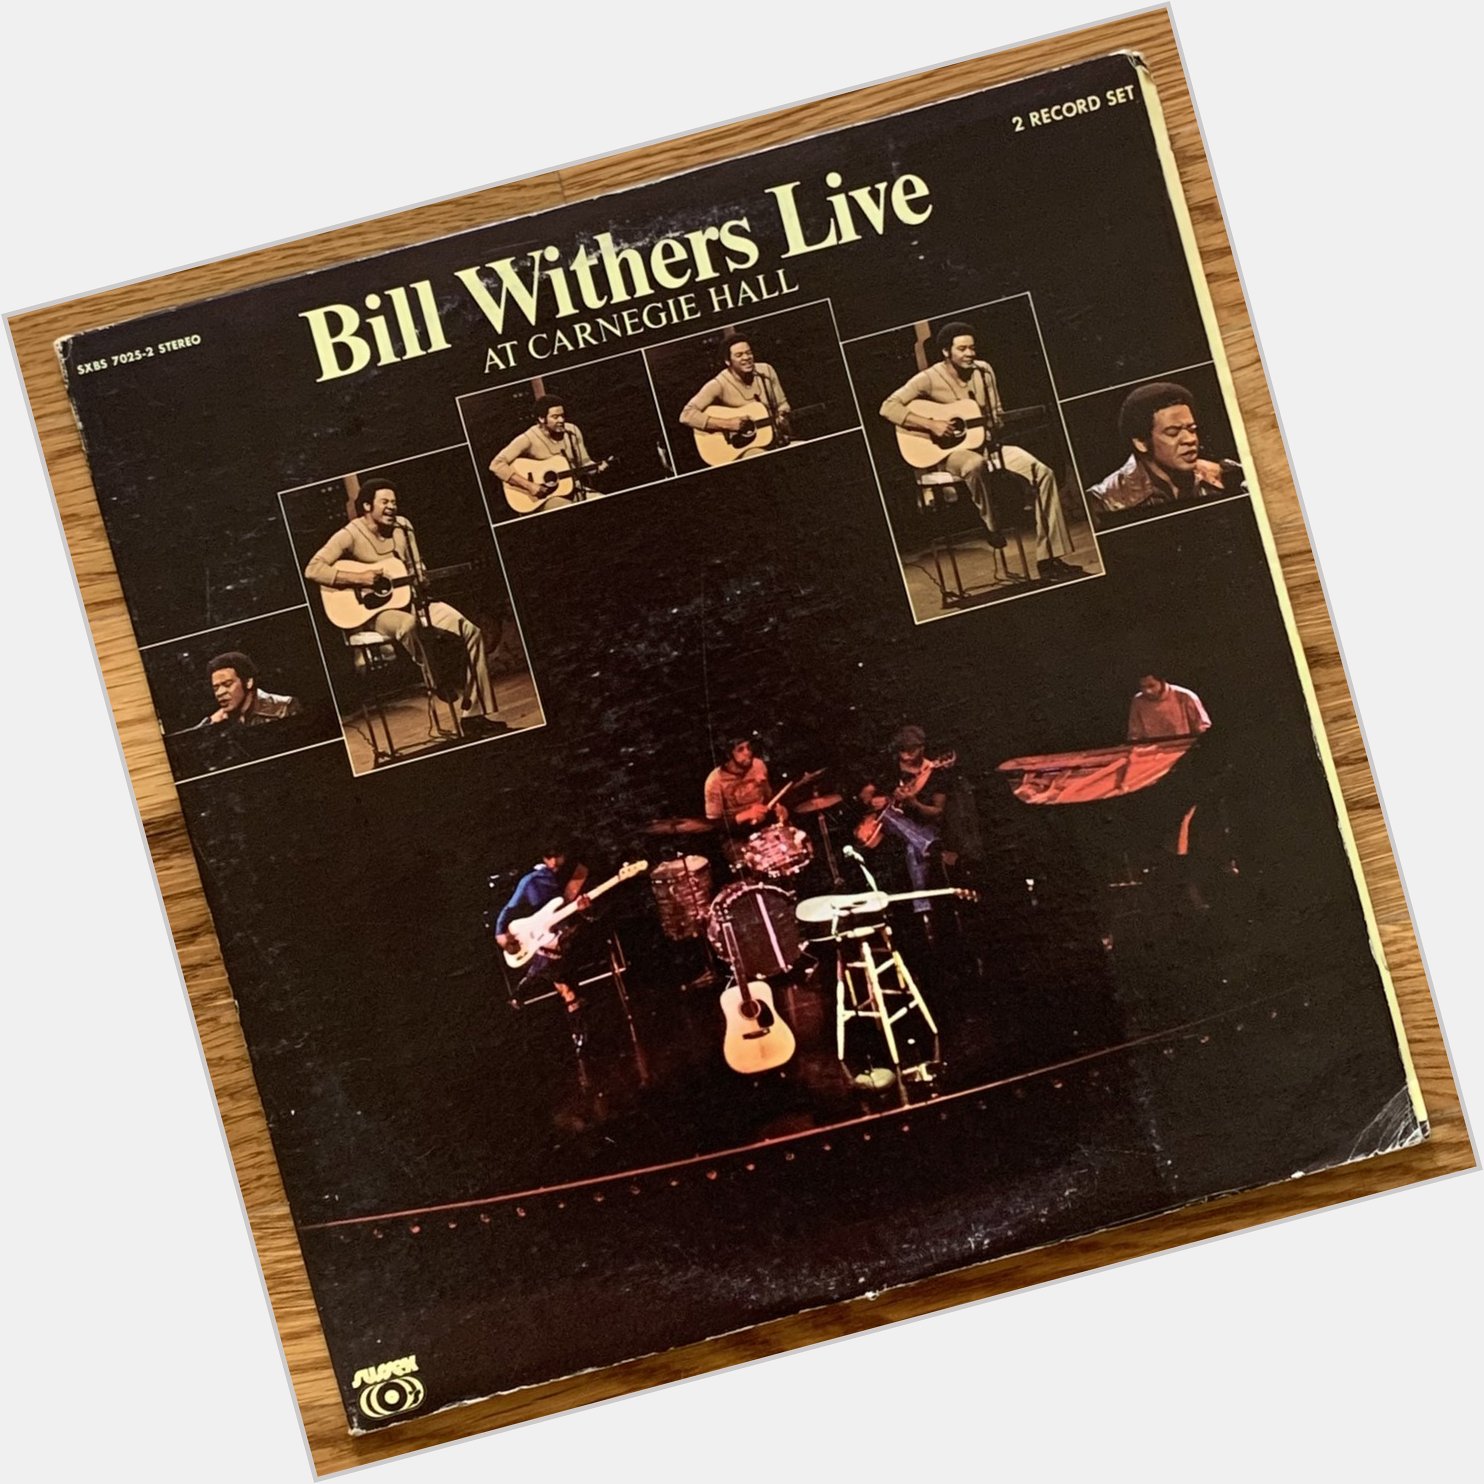 Happy birthday to you, Bill Withers 